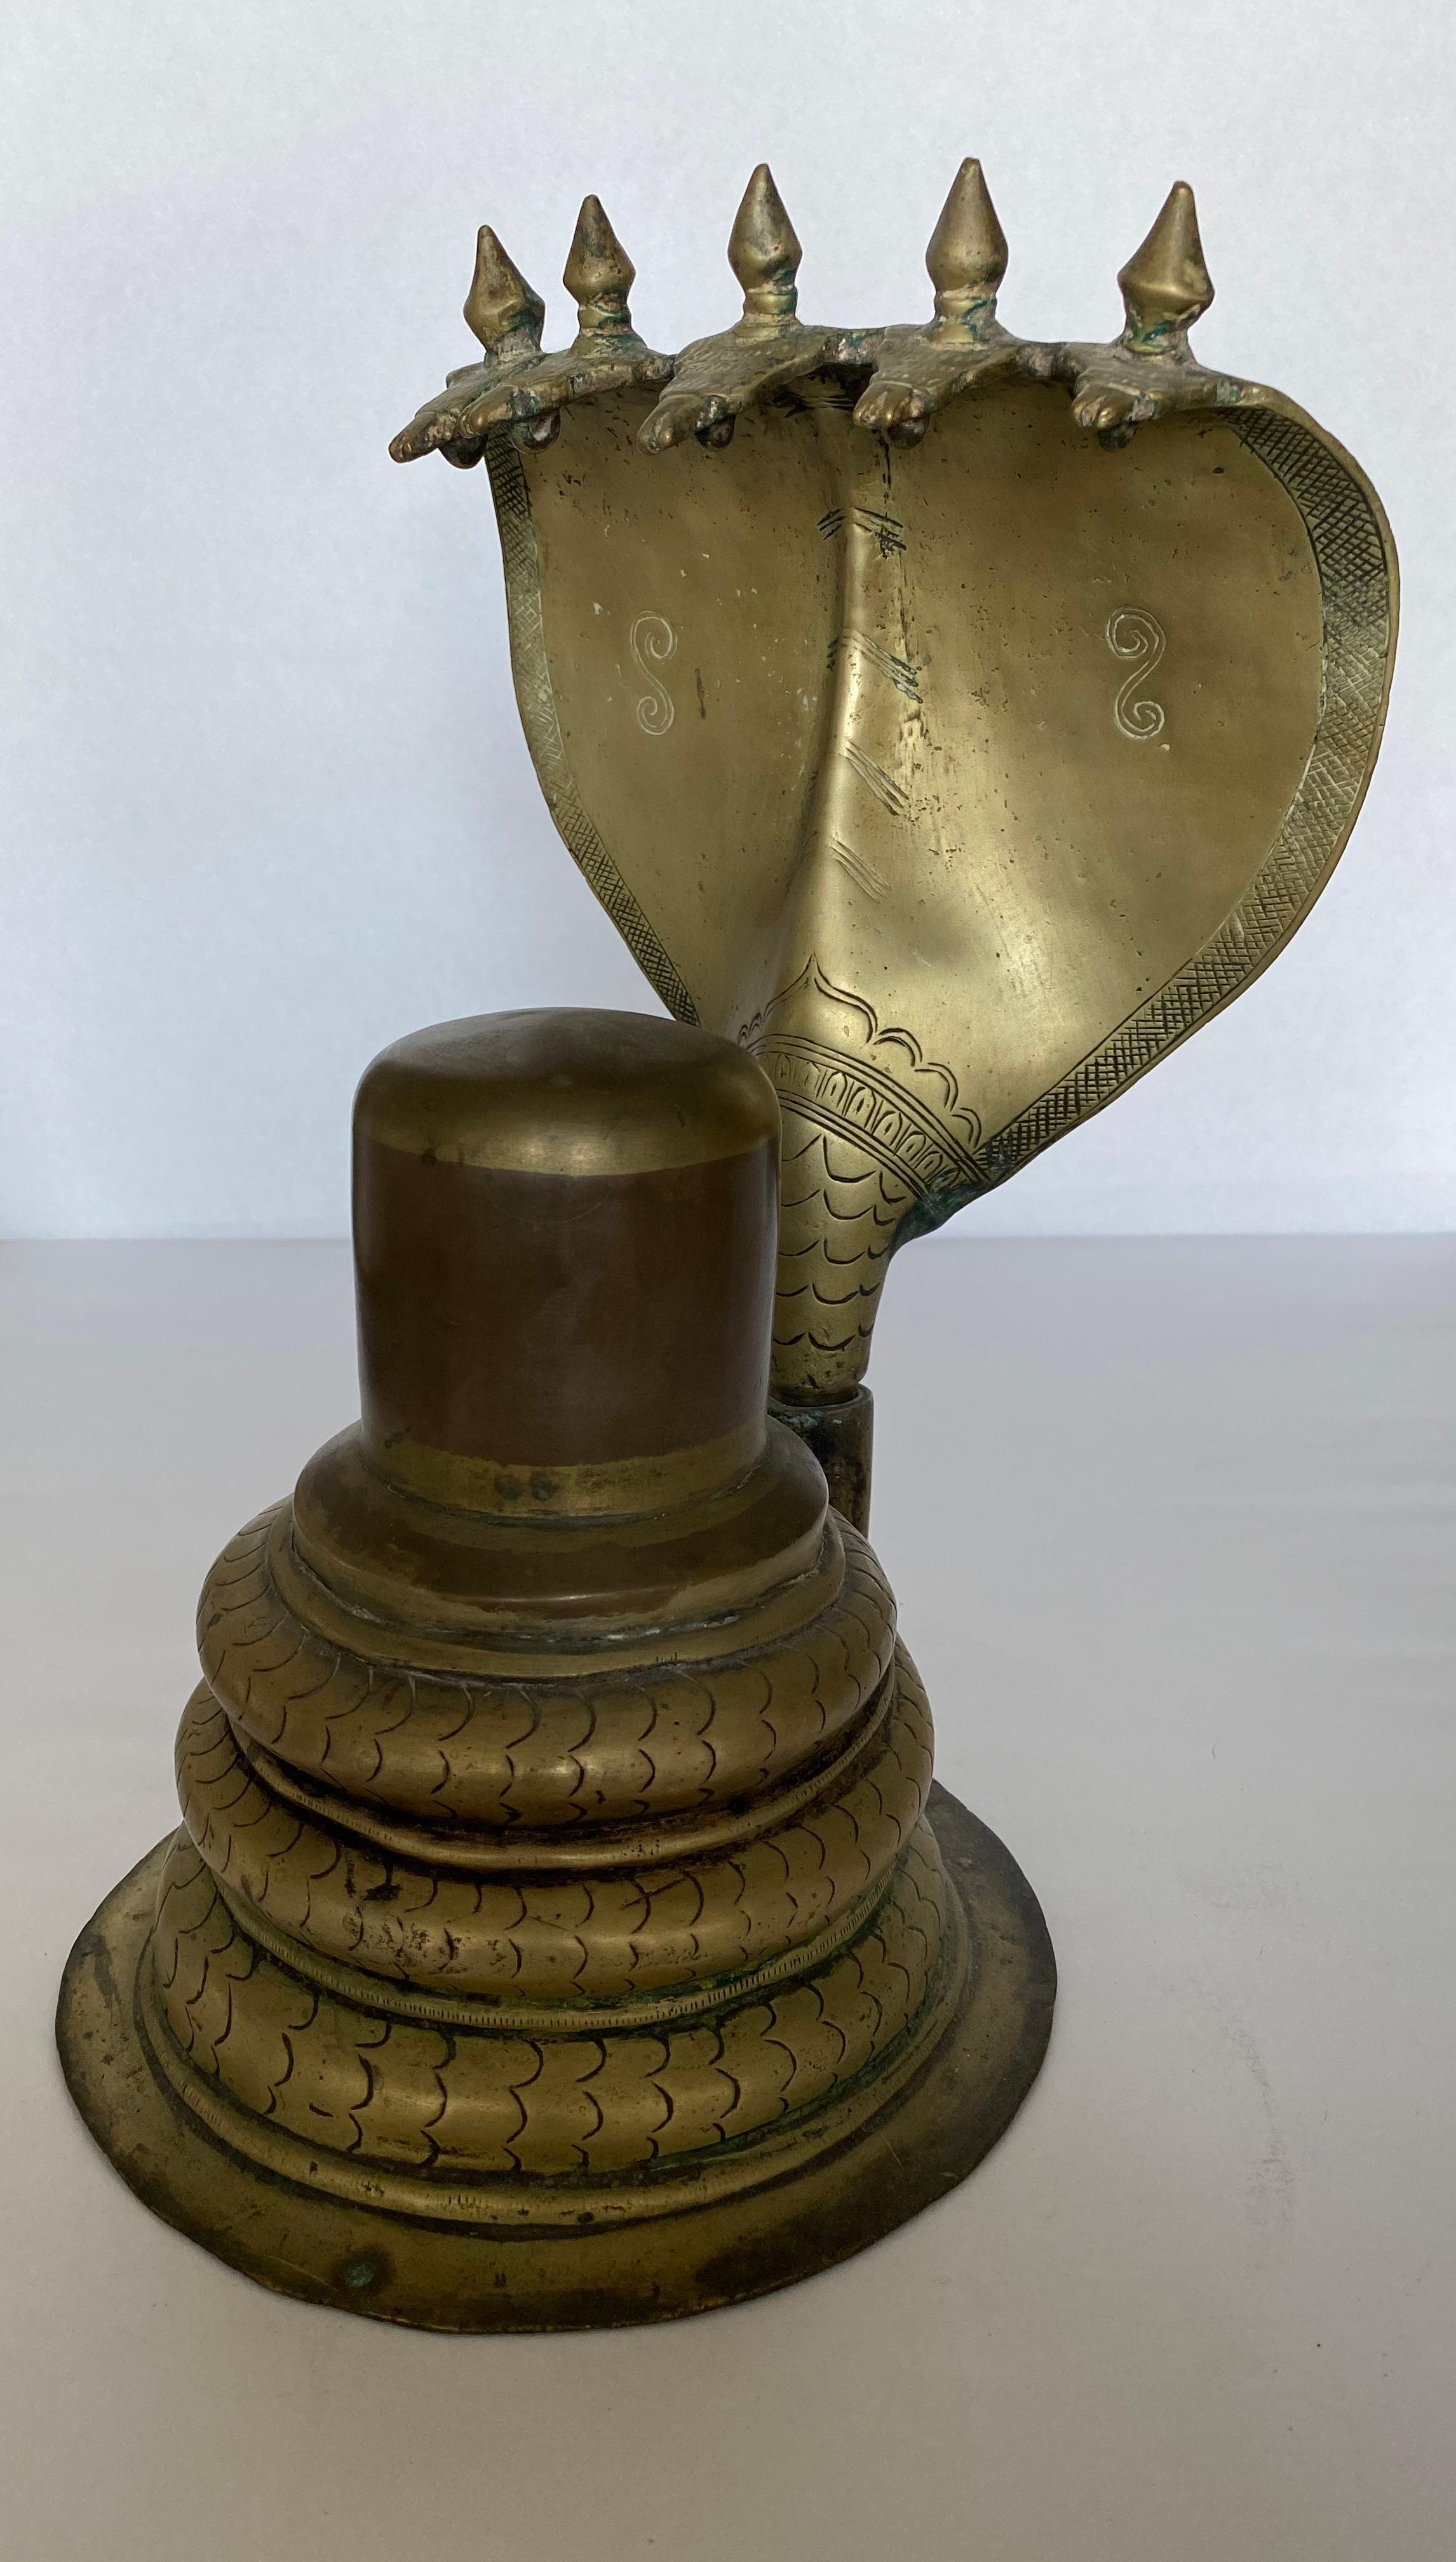 A lingam, sometimes referred to as a linga or Shiva linga, is an abstract or aniconic representation of the Hindu deity Shiva in Shaivism. It is a votary symbol revered in temples or household shrines. In this shrine, cast in 2 sections, the Shiva